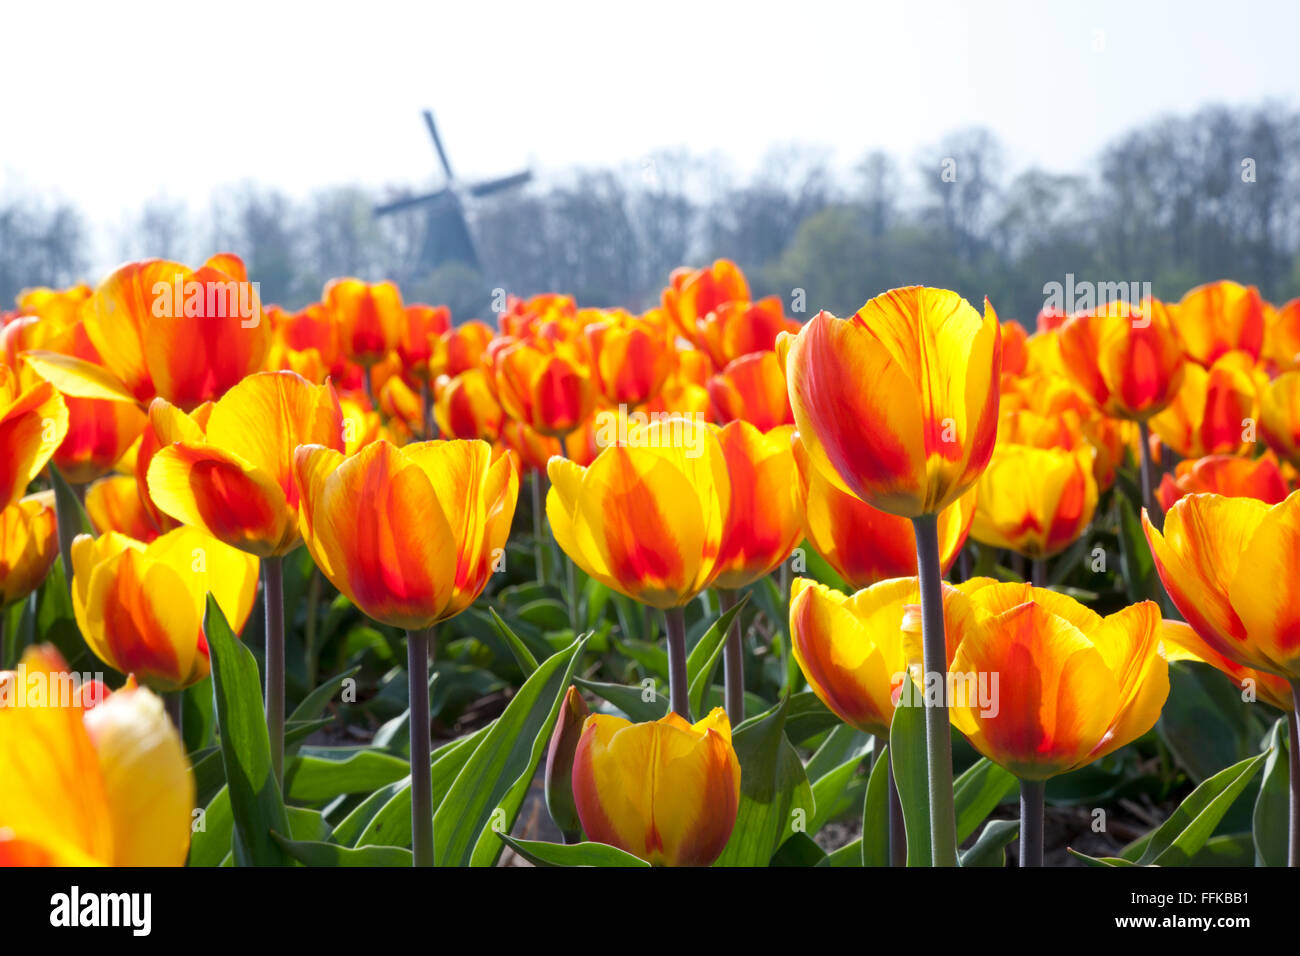 Dutch Tulip fields in springtime with a windmill in the background Stock Photo